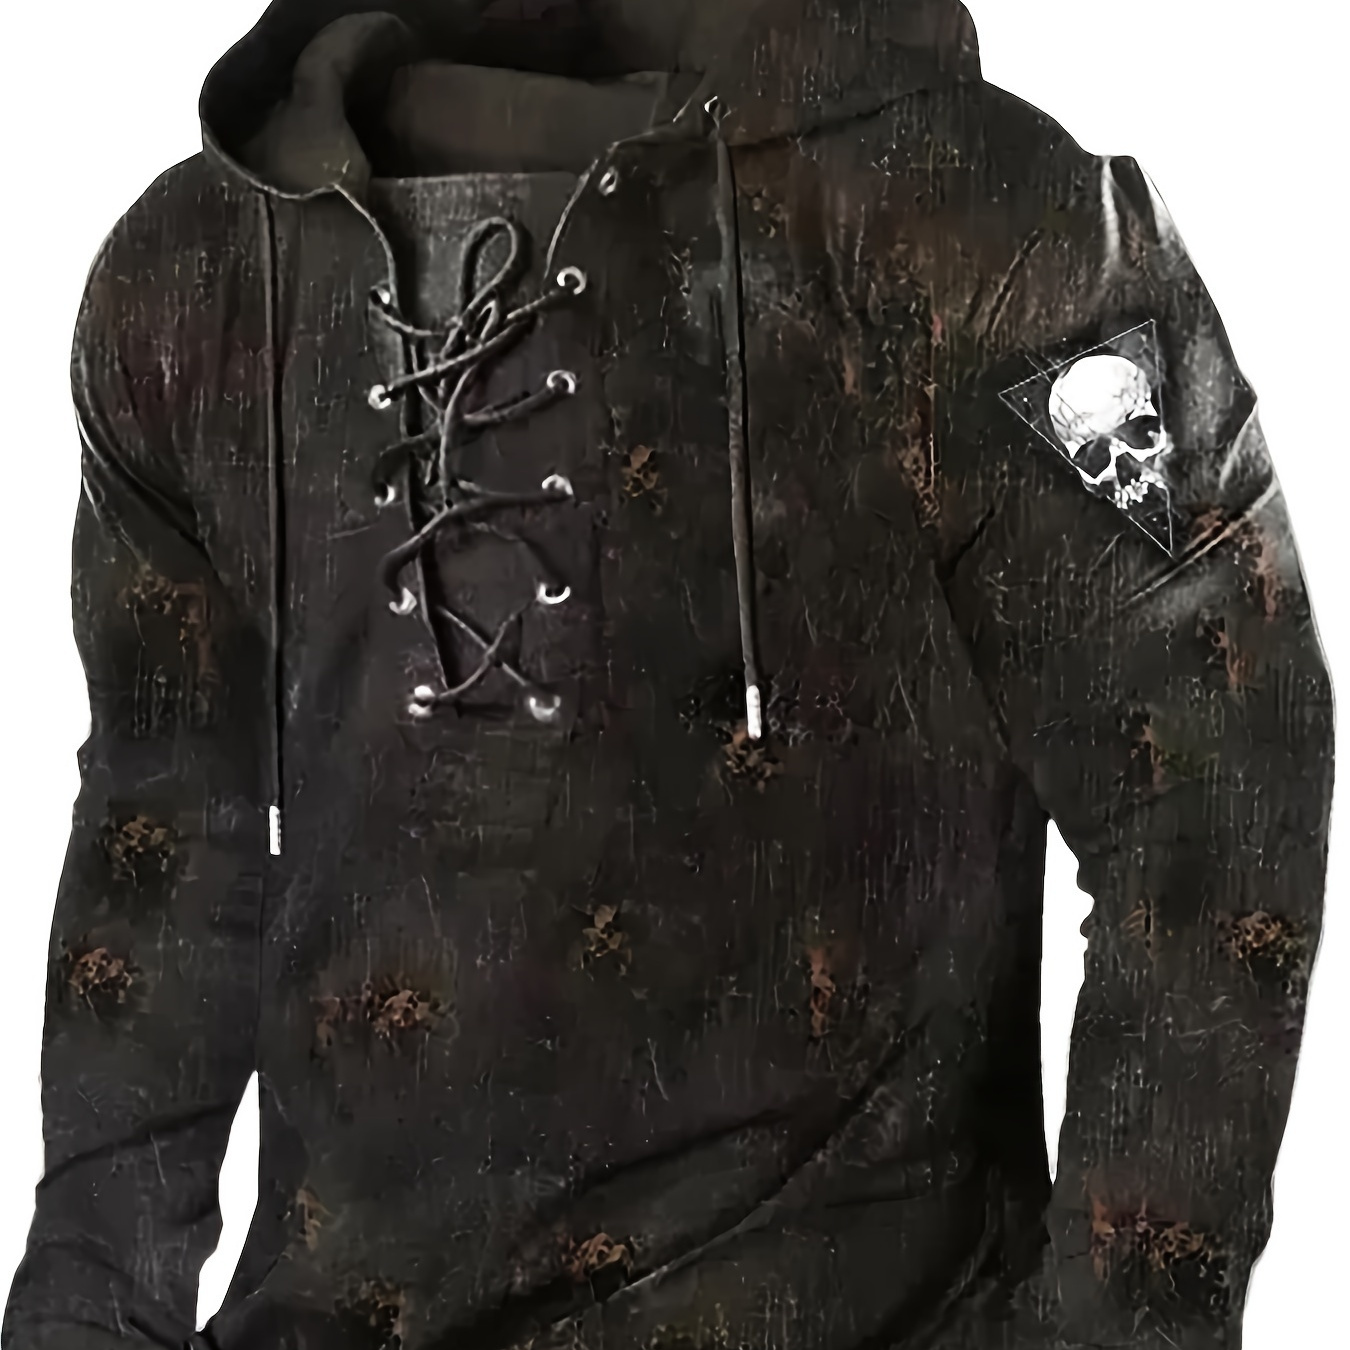 

Retro Lace Up Gothic Style Hoodies For Men, Men's Casual Graphic Design Hooded Sweatshirt Streetwear For Winter Fall, As Gifts